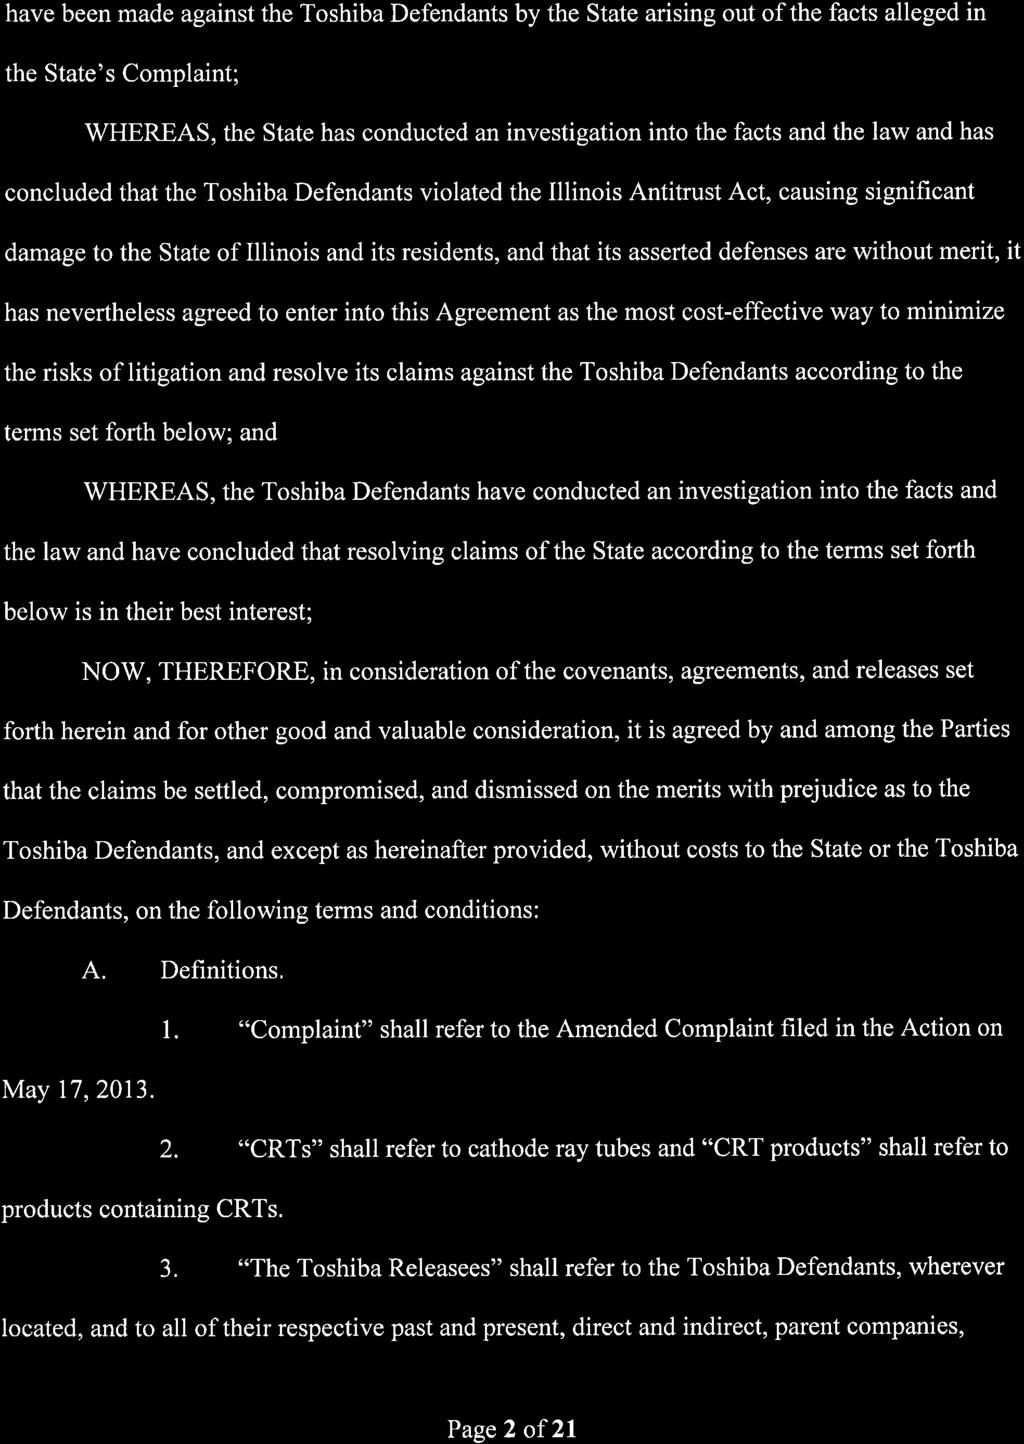 have been made against the Toshiba Defendants by the State arising out of the facts alleged in the State's Complaint; WHEREAS, the State has conducted an investigation into the facts and the law and